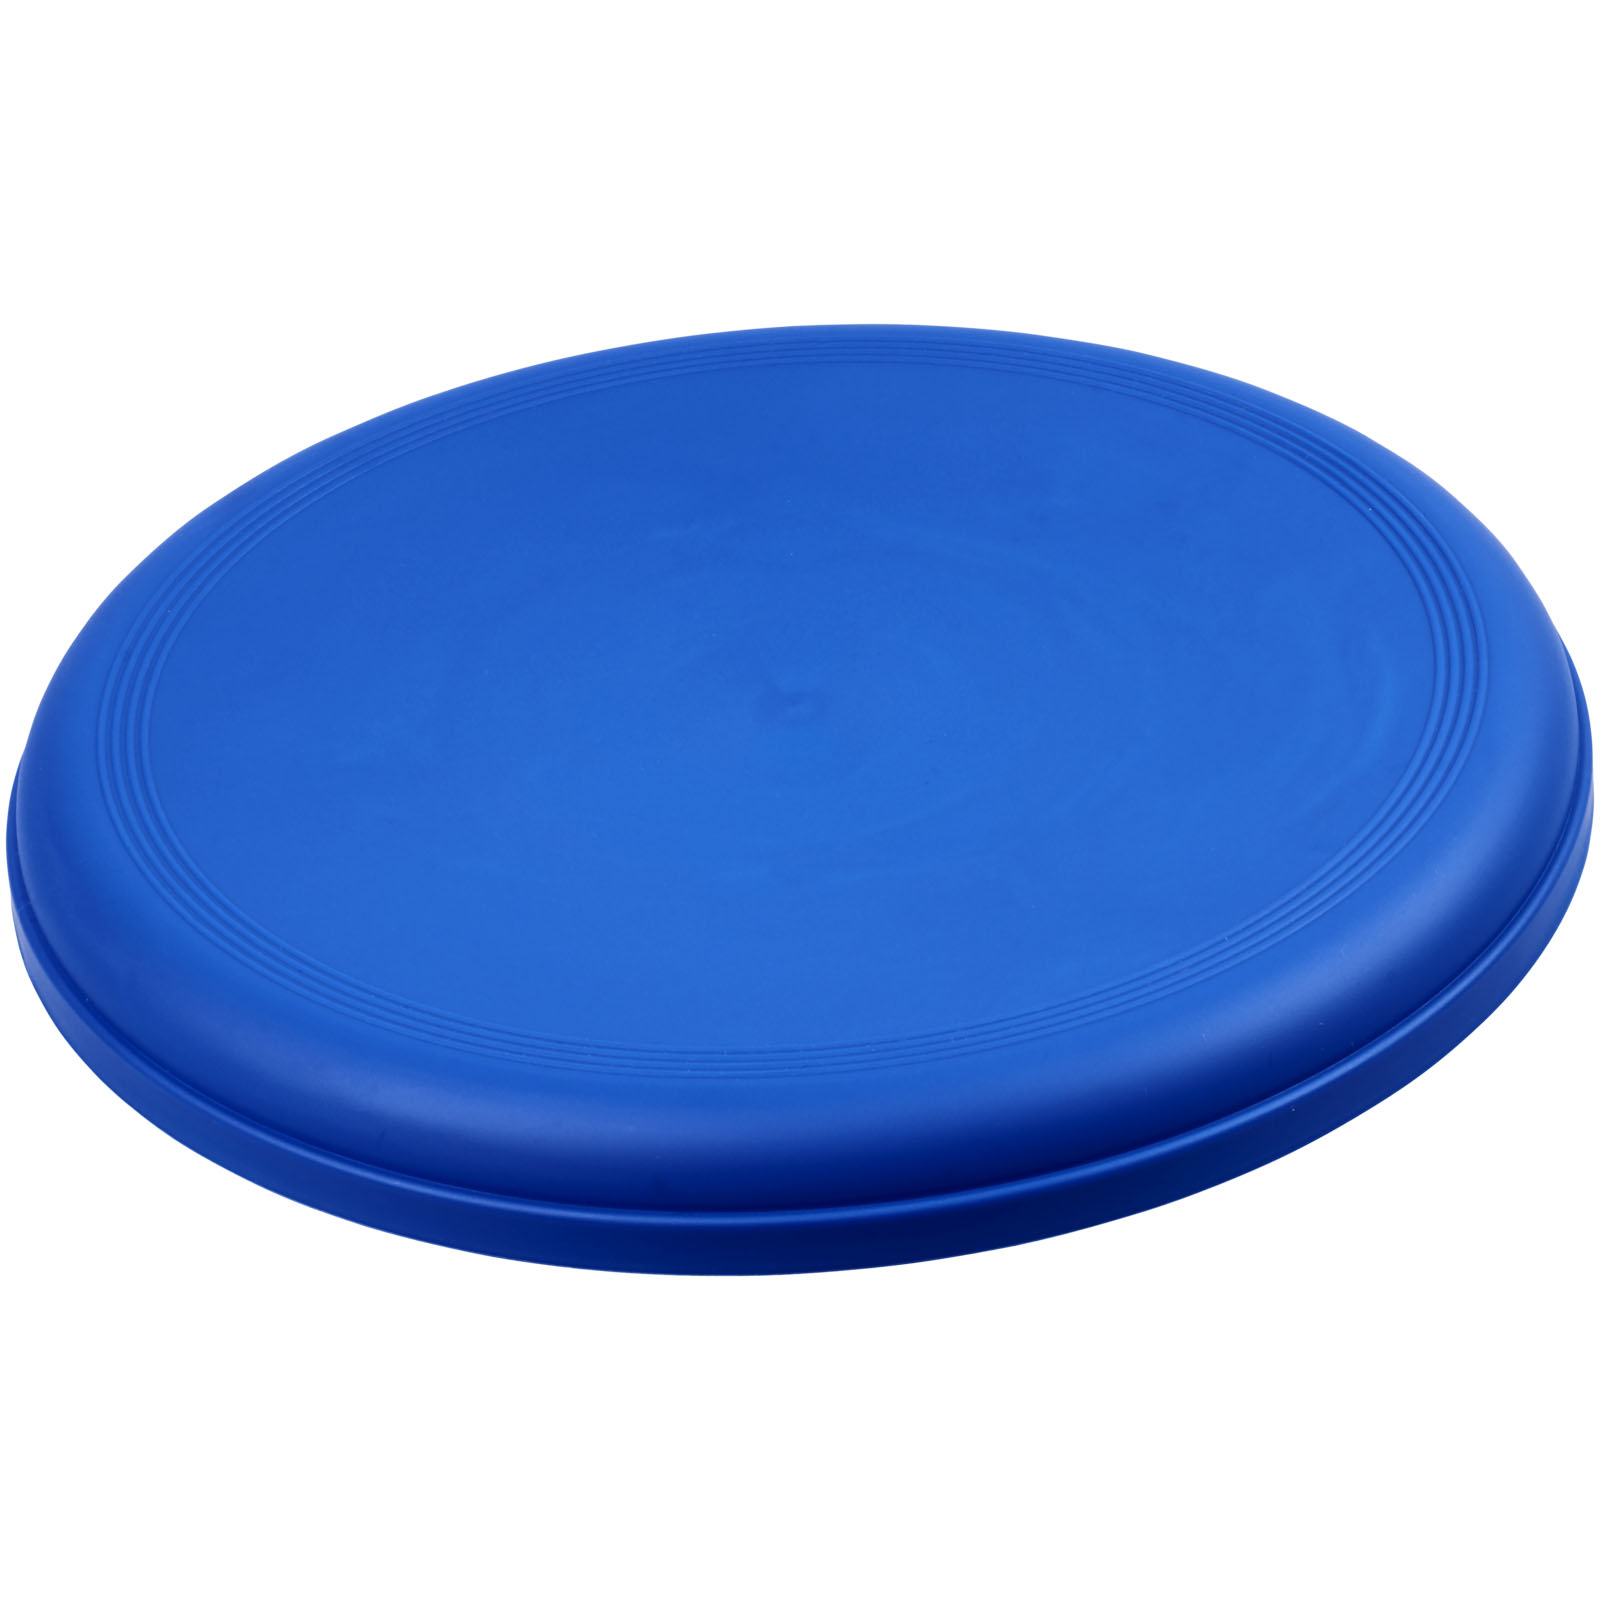 Advertising Outdoor Games - Max plastic dog frisbee - 0